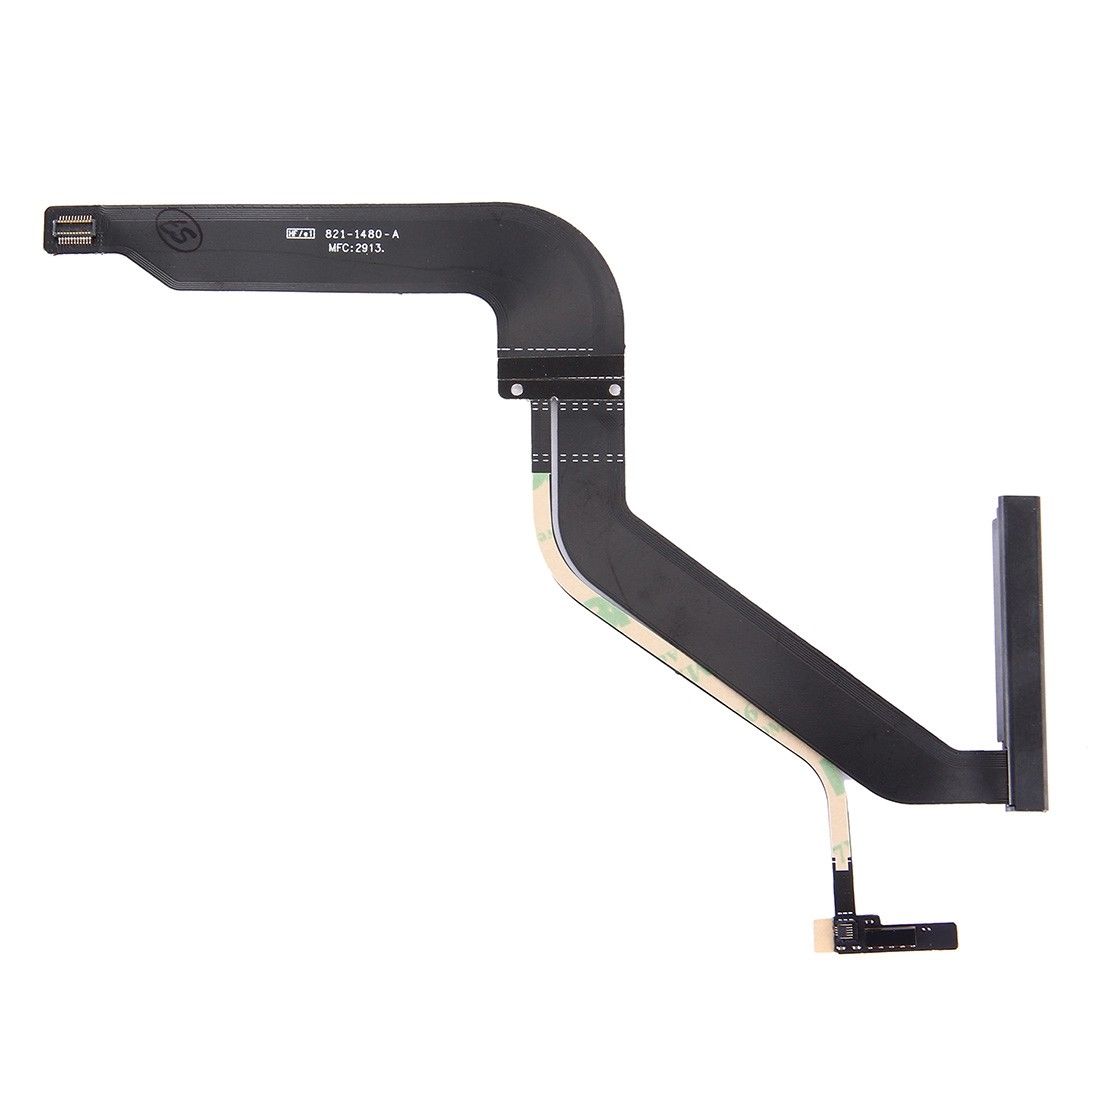 MacBook Pro 13" A1278 821-1480-A HDD Hard Drive Flex Cable for [product_price] - First Help Tech